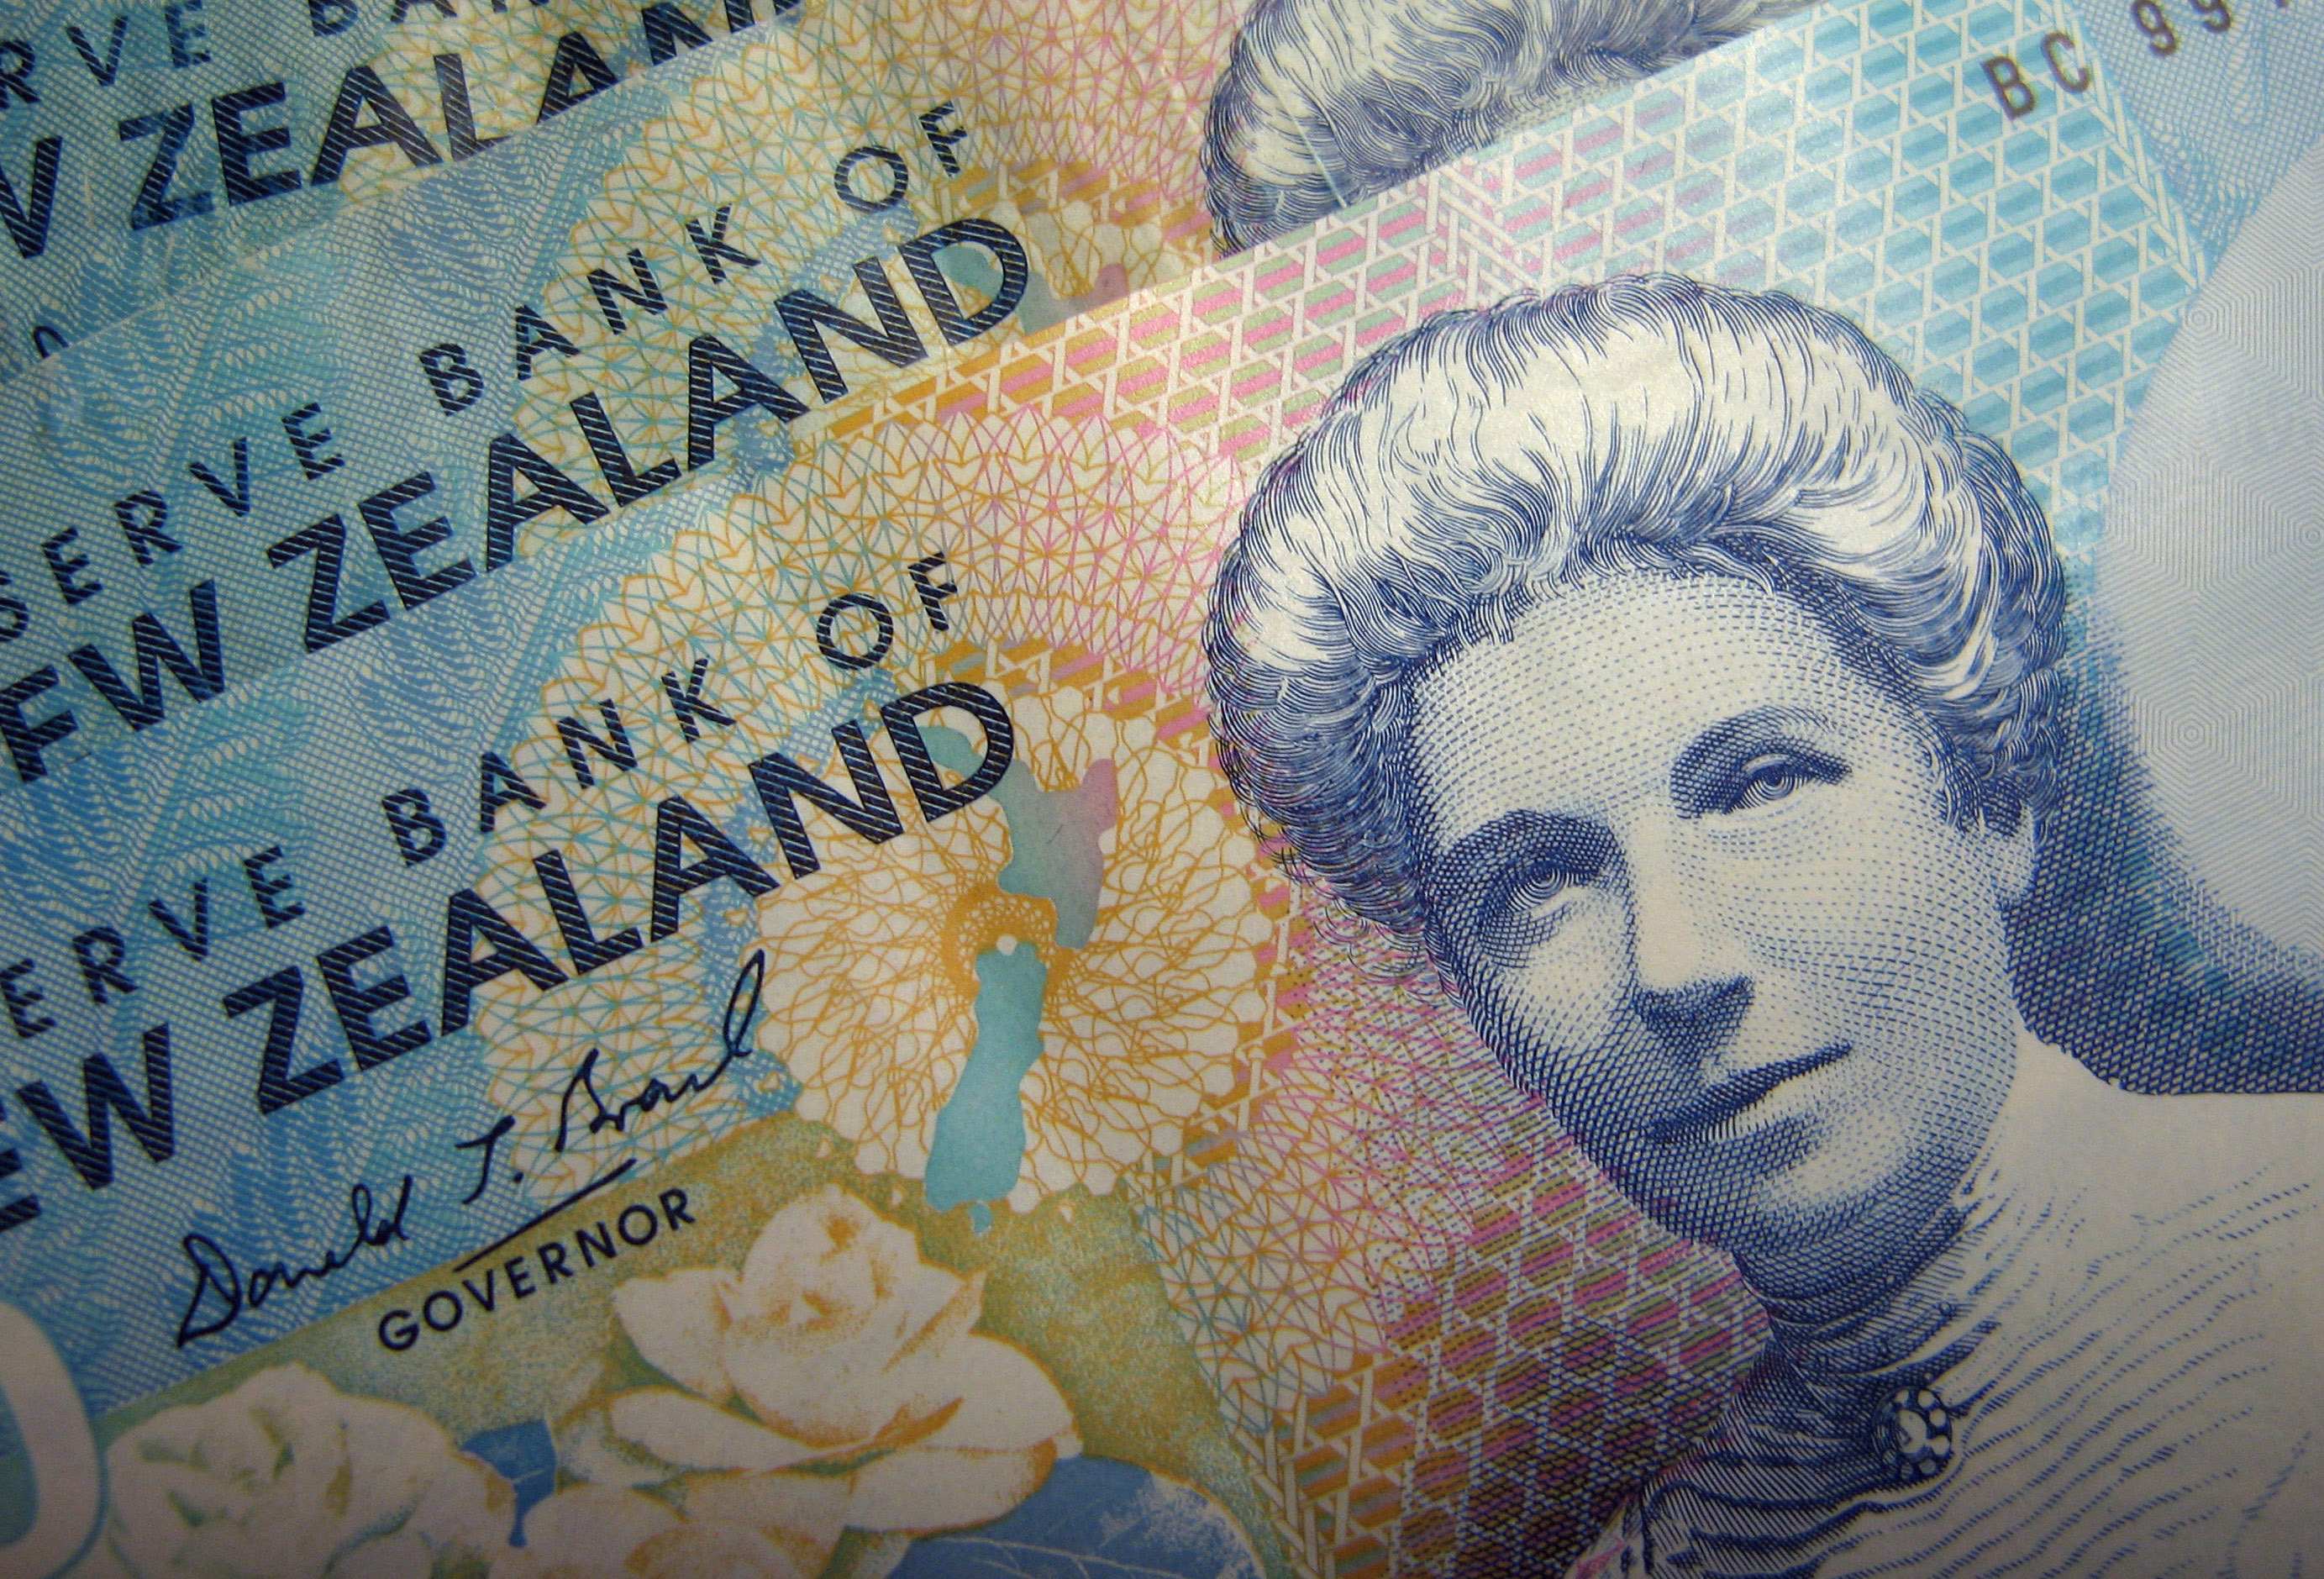 The contamination scandal has failed to dent the New Zealand dollar. Photo: Reuters